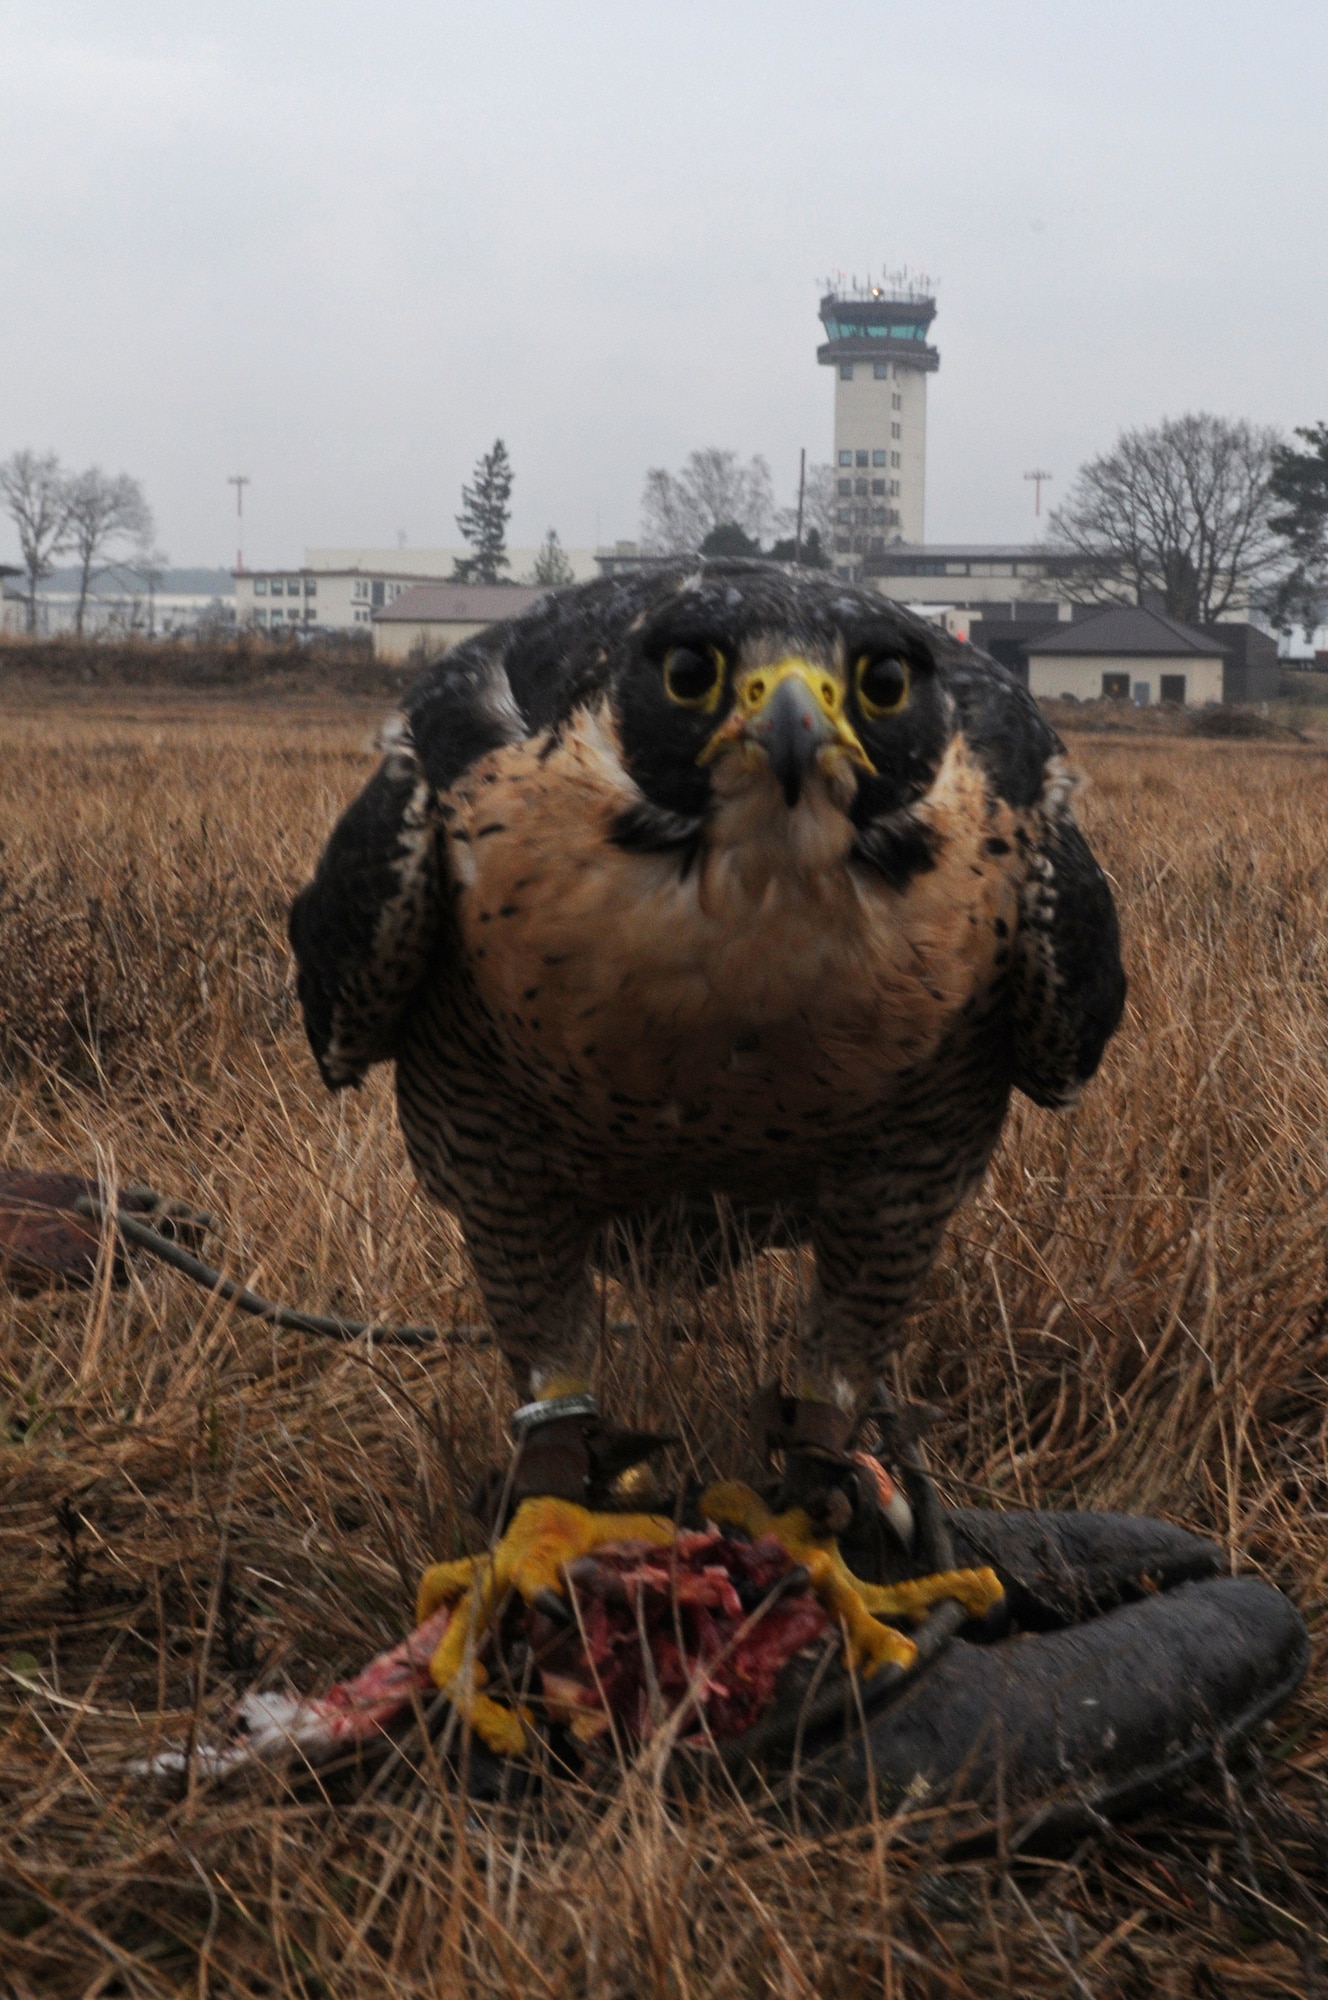 Charlie, a peregrine falcon, stands by for a call near the Ramstein Air Base flightline Feb. 4, 2009. Charlie scares all other birds off the flightline so they don't interfere with inbound or outbound flights. (U.S. Air Force photo by Airman 1st Class Grovert Fuentes-Contreras)